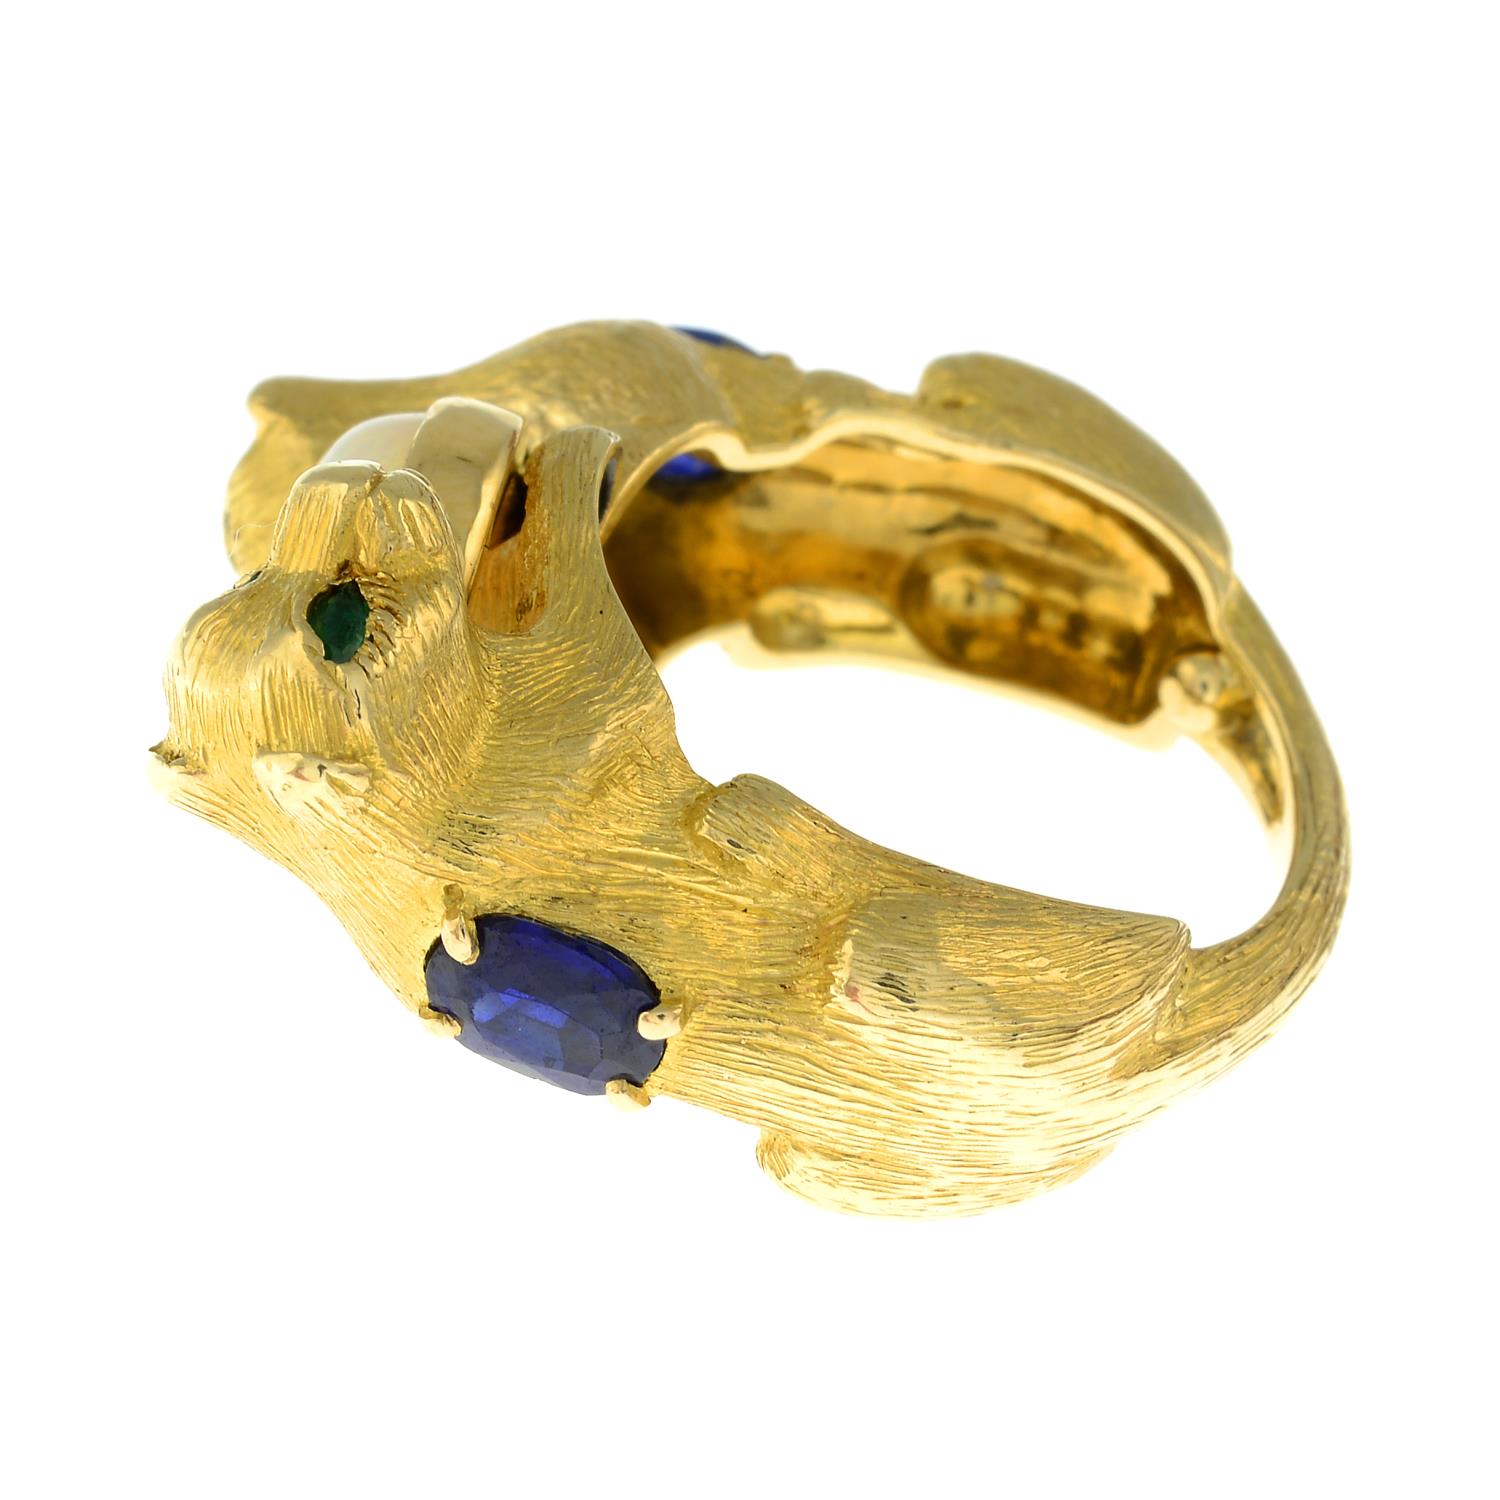 A ring, designed as two gem-set cats, holding an opal cabochon. - Image 3 of 4